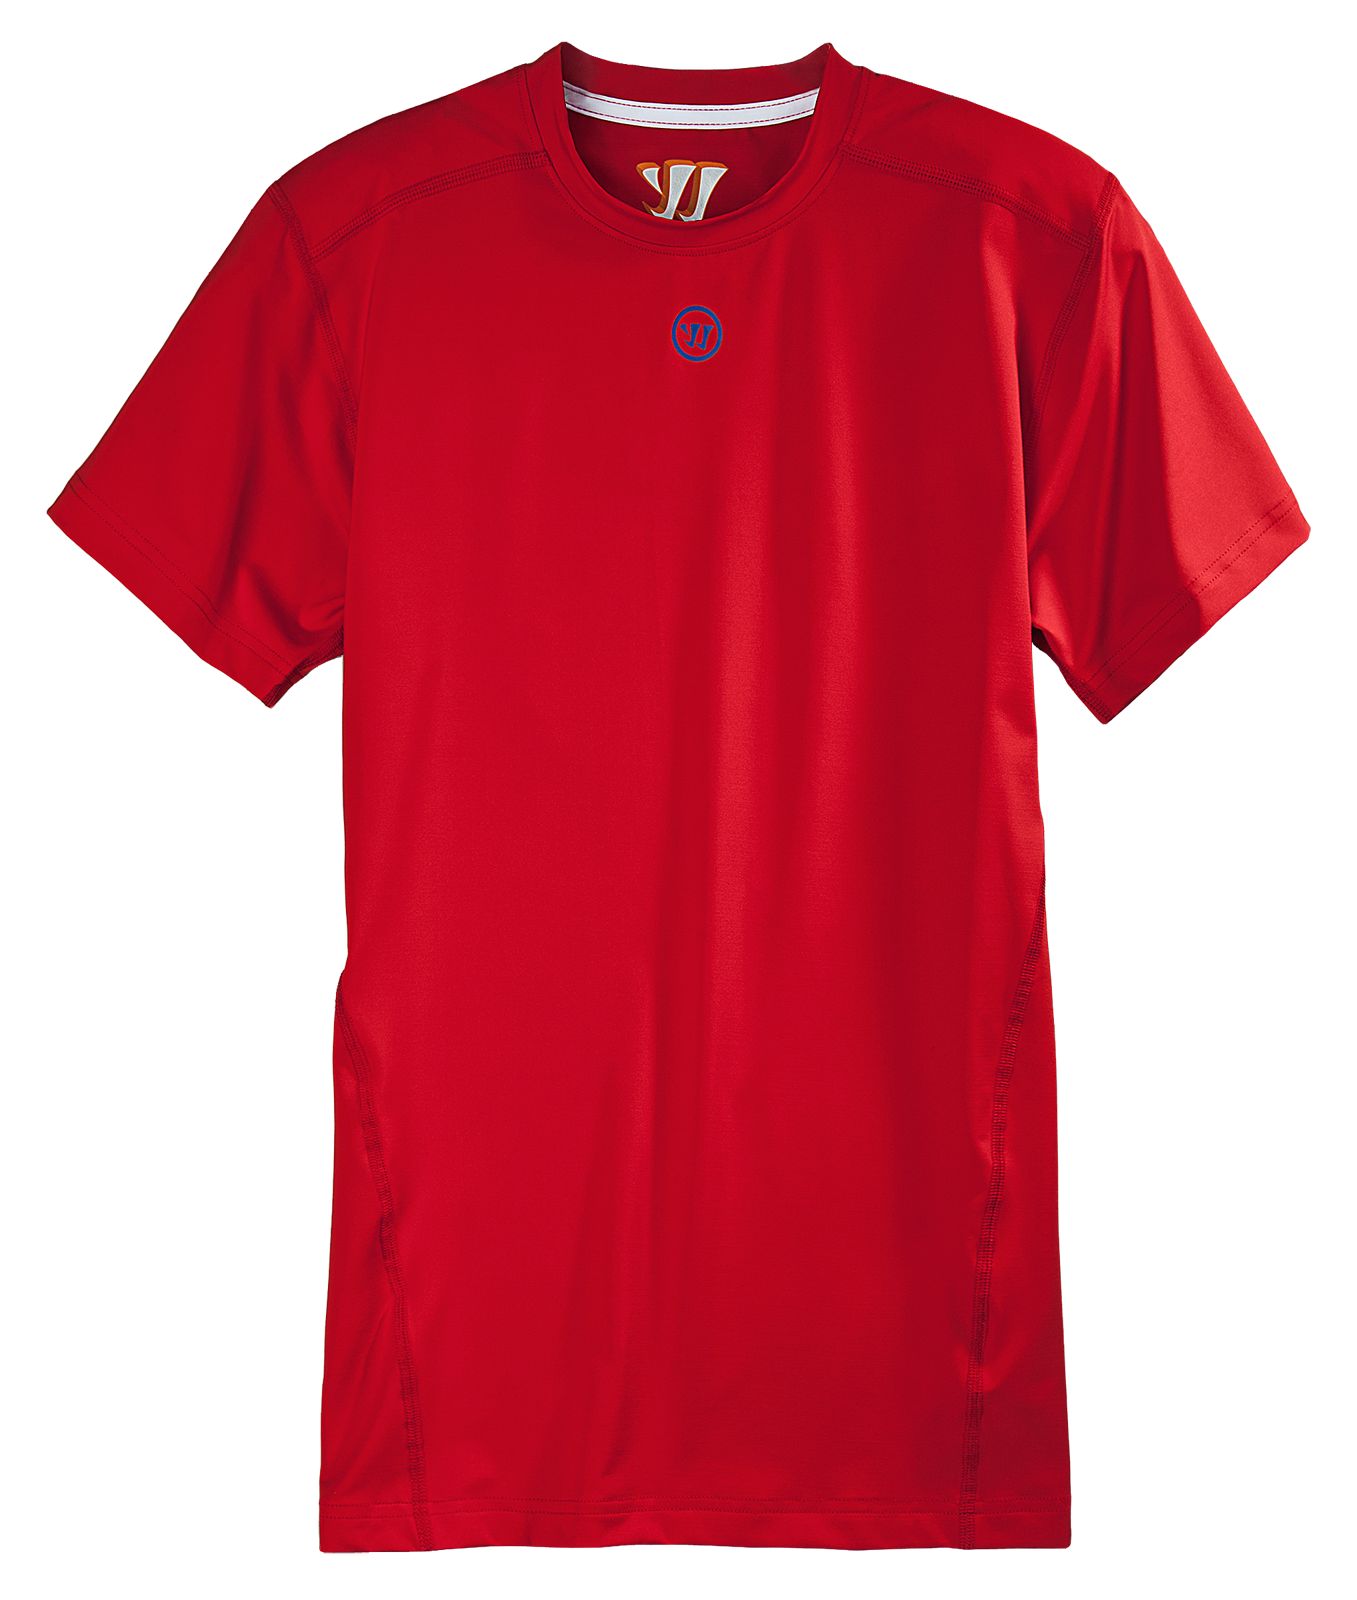 Basic SS Compression Top, Red image number 0